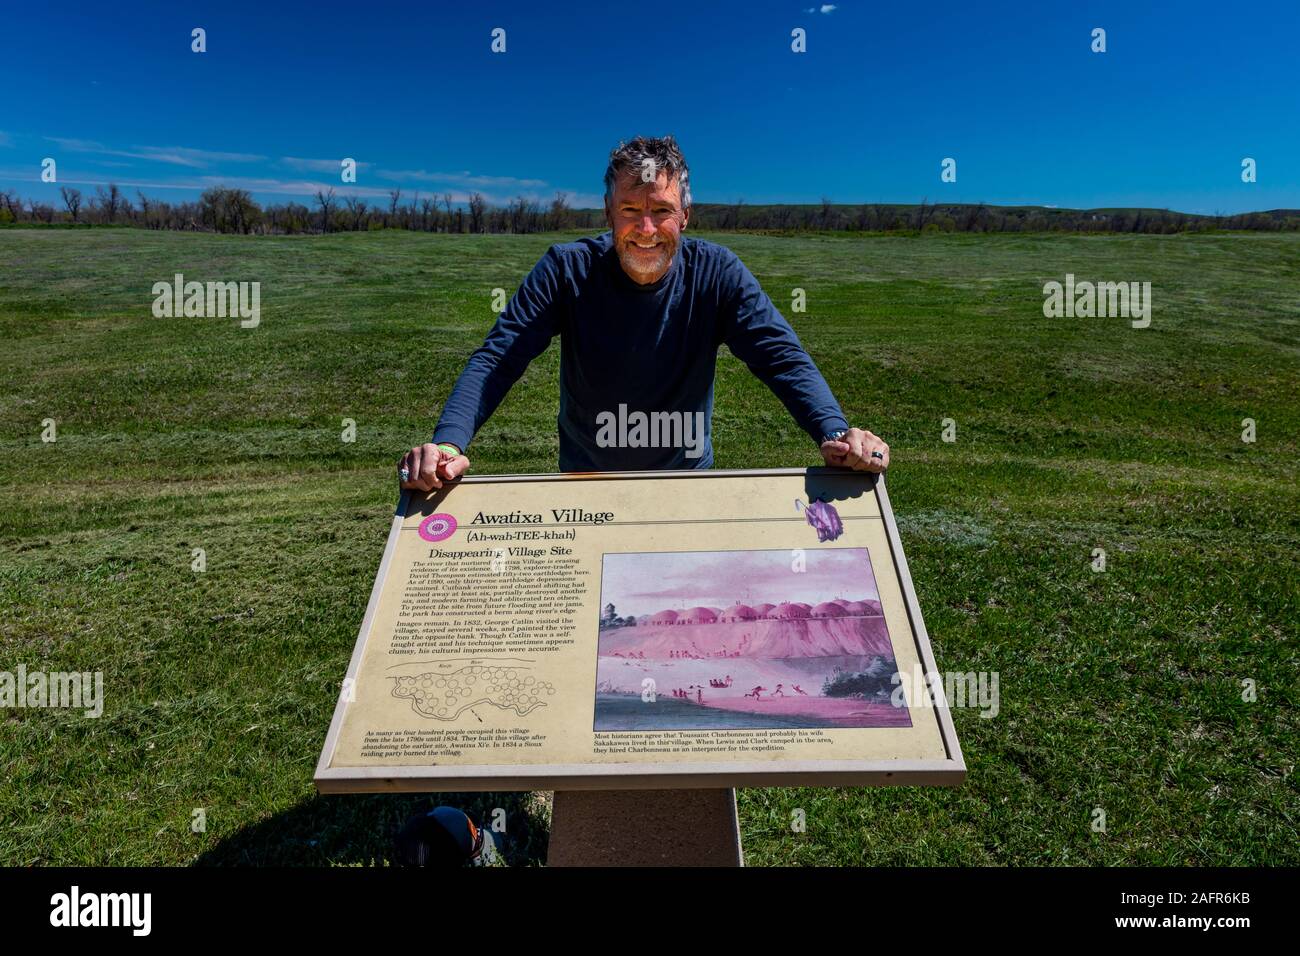 MAY 20, FORT MANDAN, NORTH DAKOTA, USA - Bill Terry at AWATIXA village site at Knife River Indian Village, the site where Sacagawea meets Lewis and Clark for their 1804-1806 expedition Stock Photo